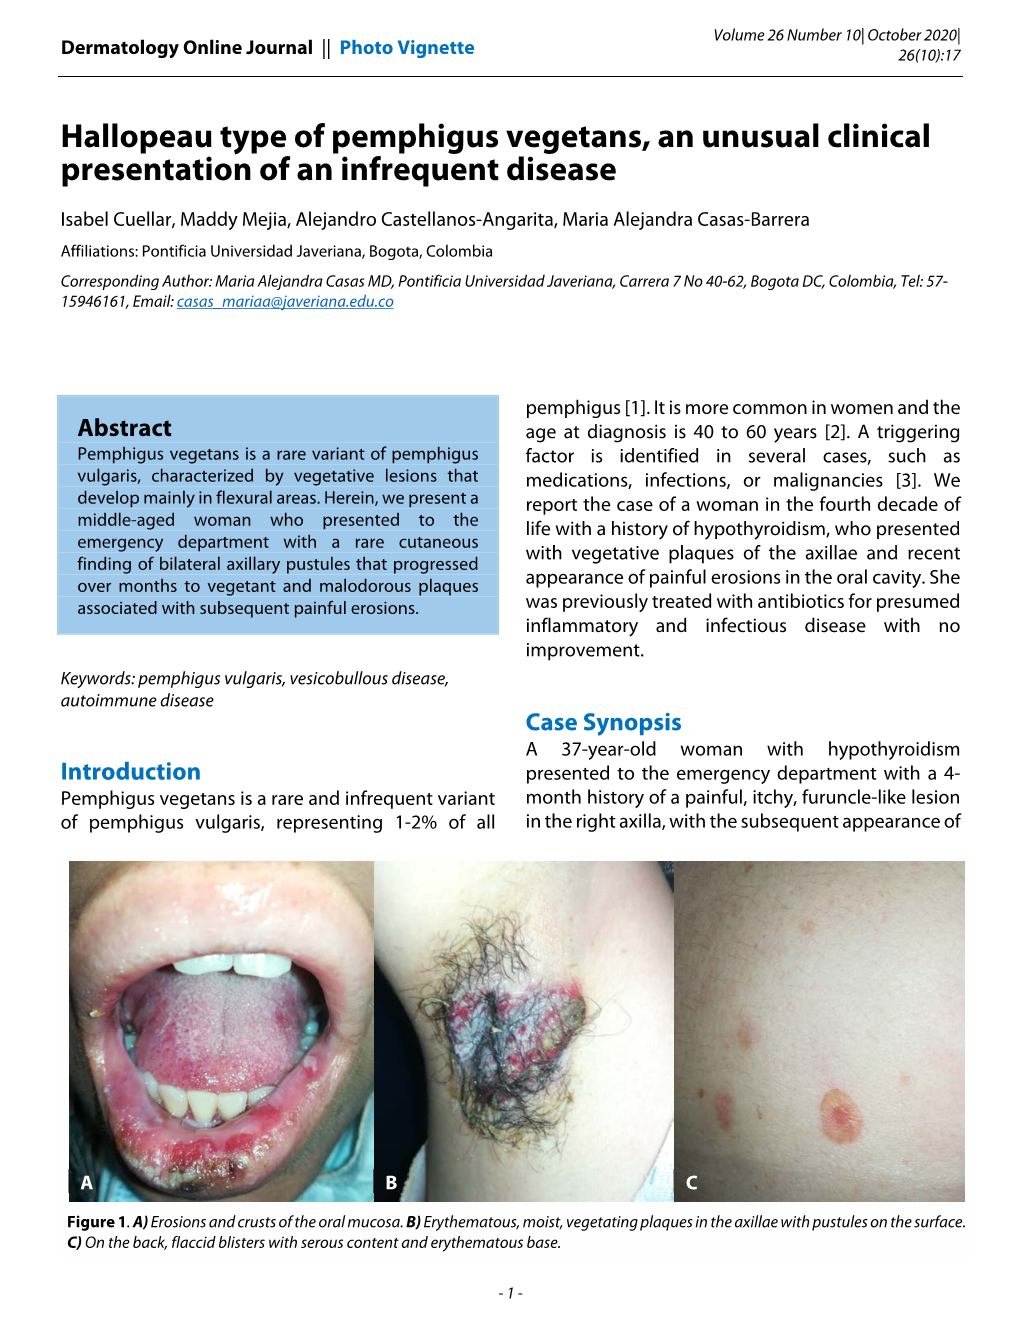 Hallopeau Type of Pemphigus Vegetans, an Unusual Clinical Presentation of an Infrequent Disease